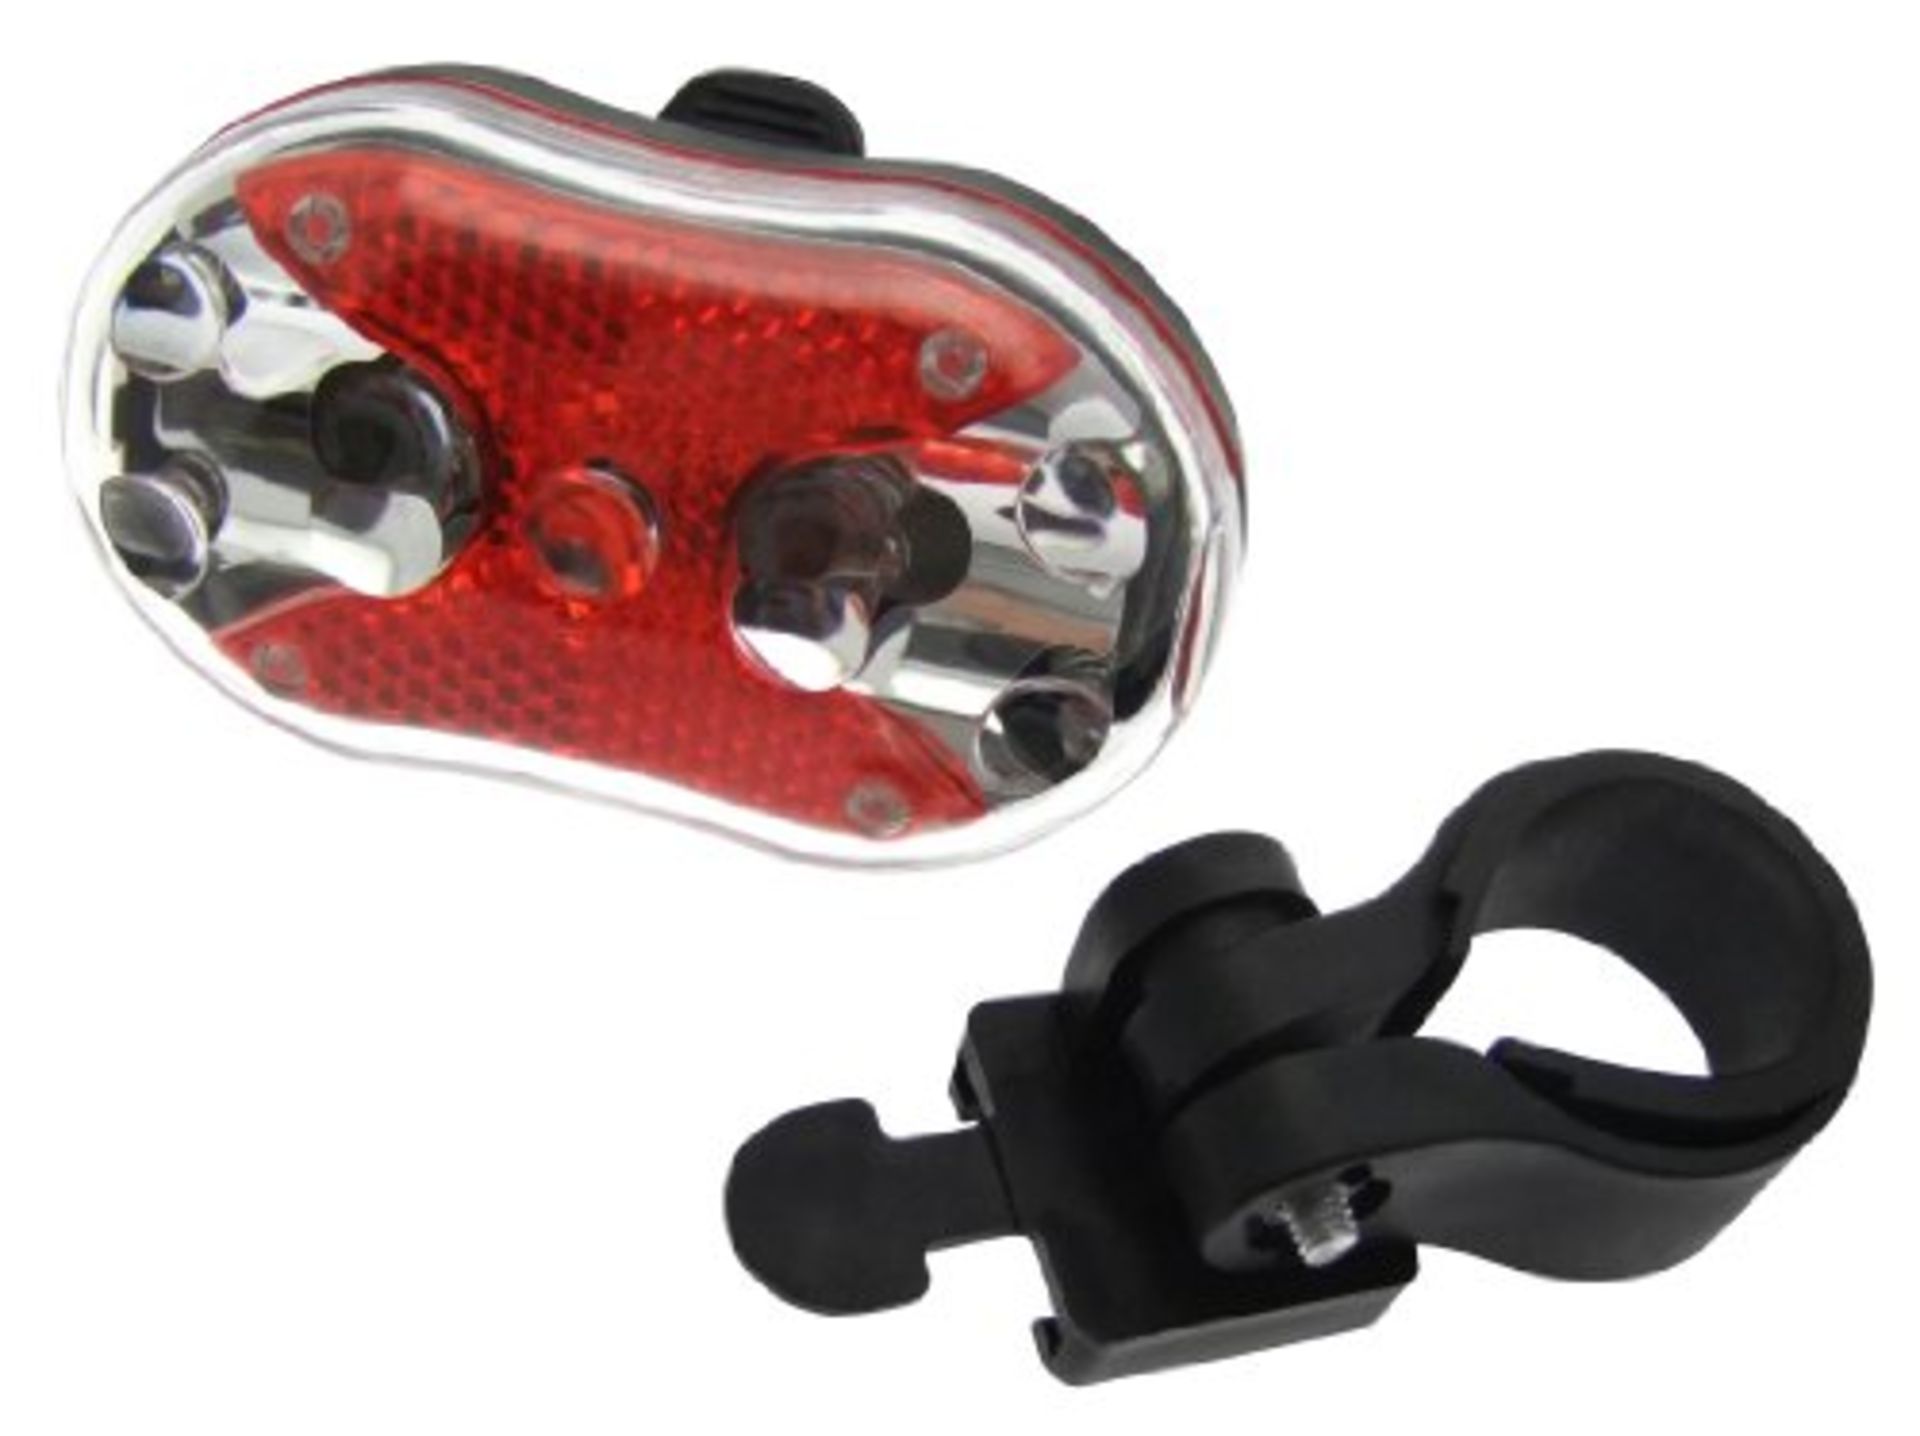 V *TRADE QTY* Brand New 9 LED Rear Bicycle Light - 7 Modes - Mounting Bracket - Belt clip X 8 YOUR